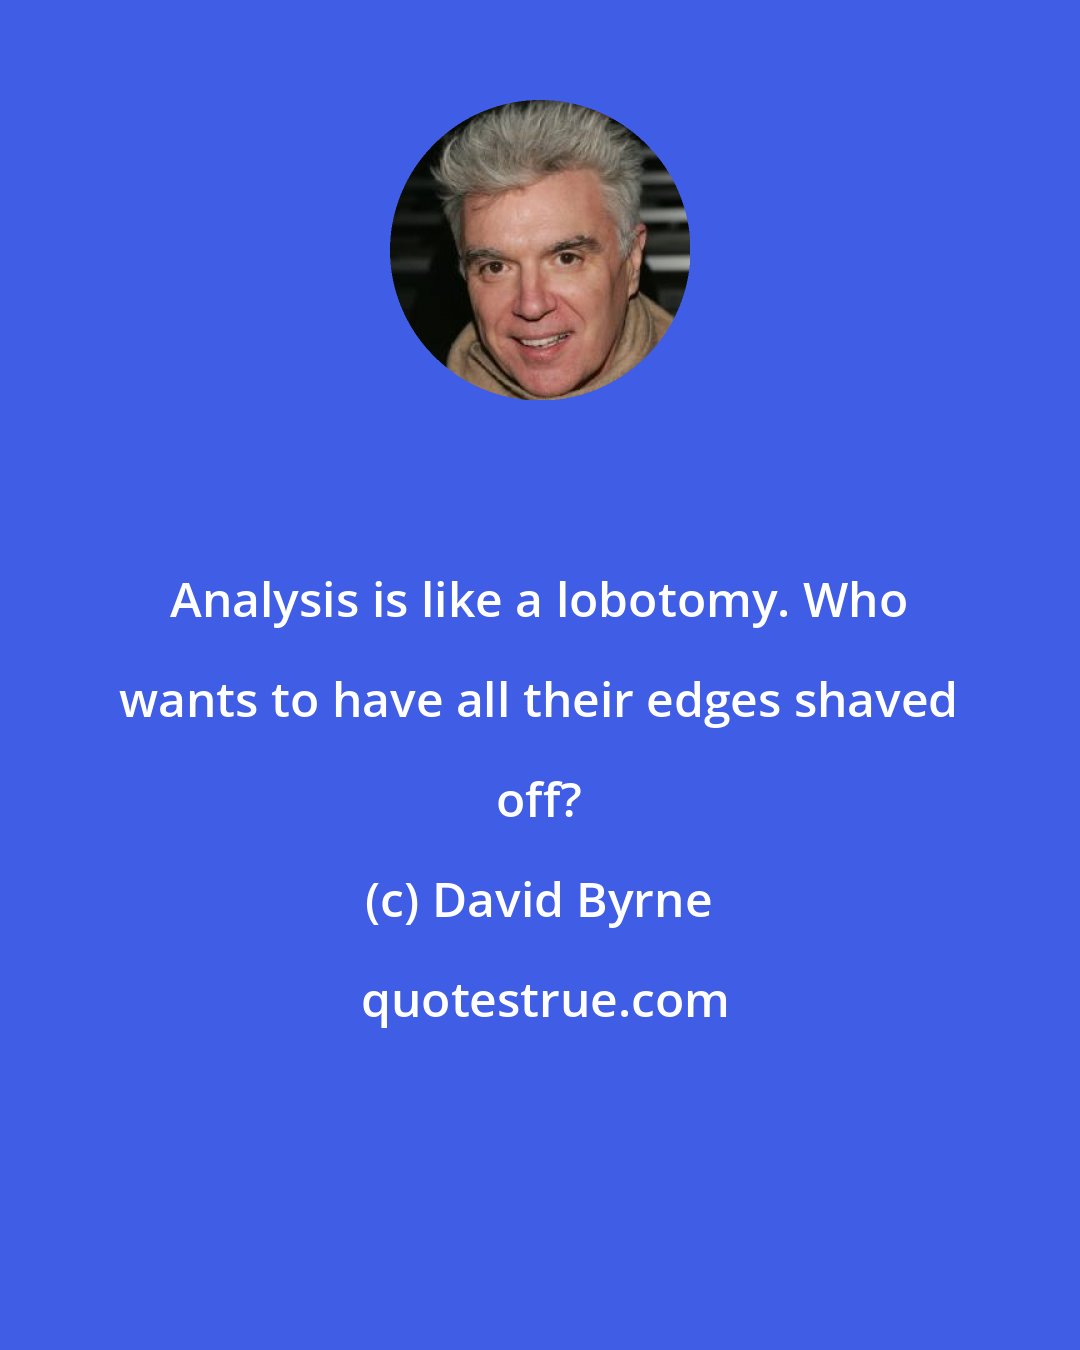 David Byrne: Analysis is like a lobotomy. Who wants to have all their edges shaved off?